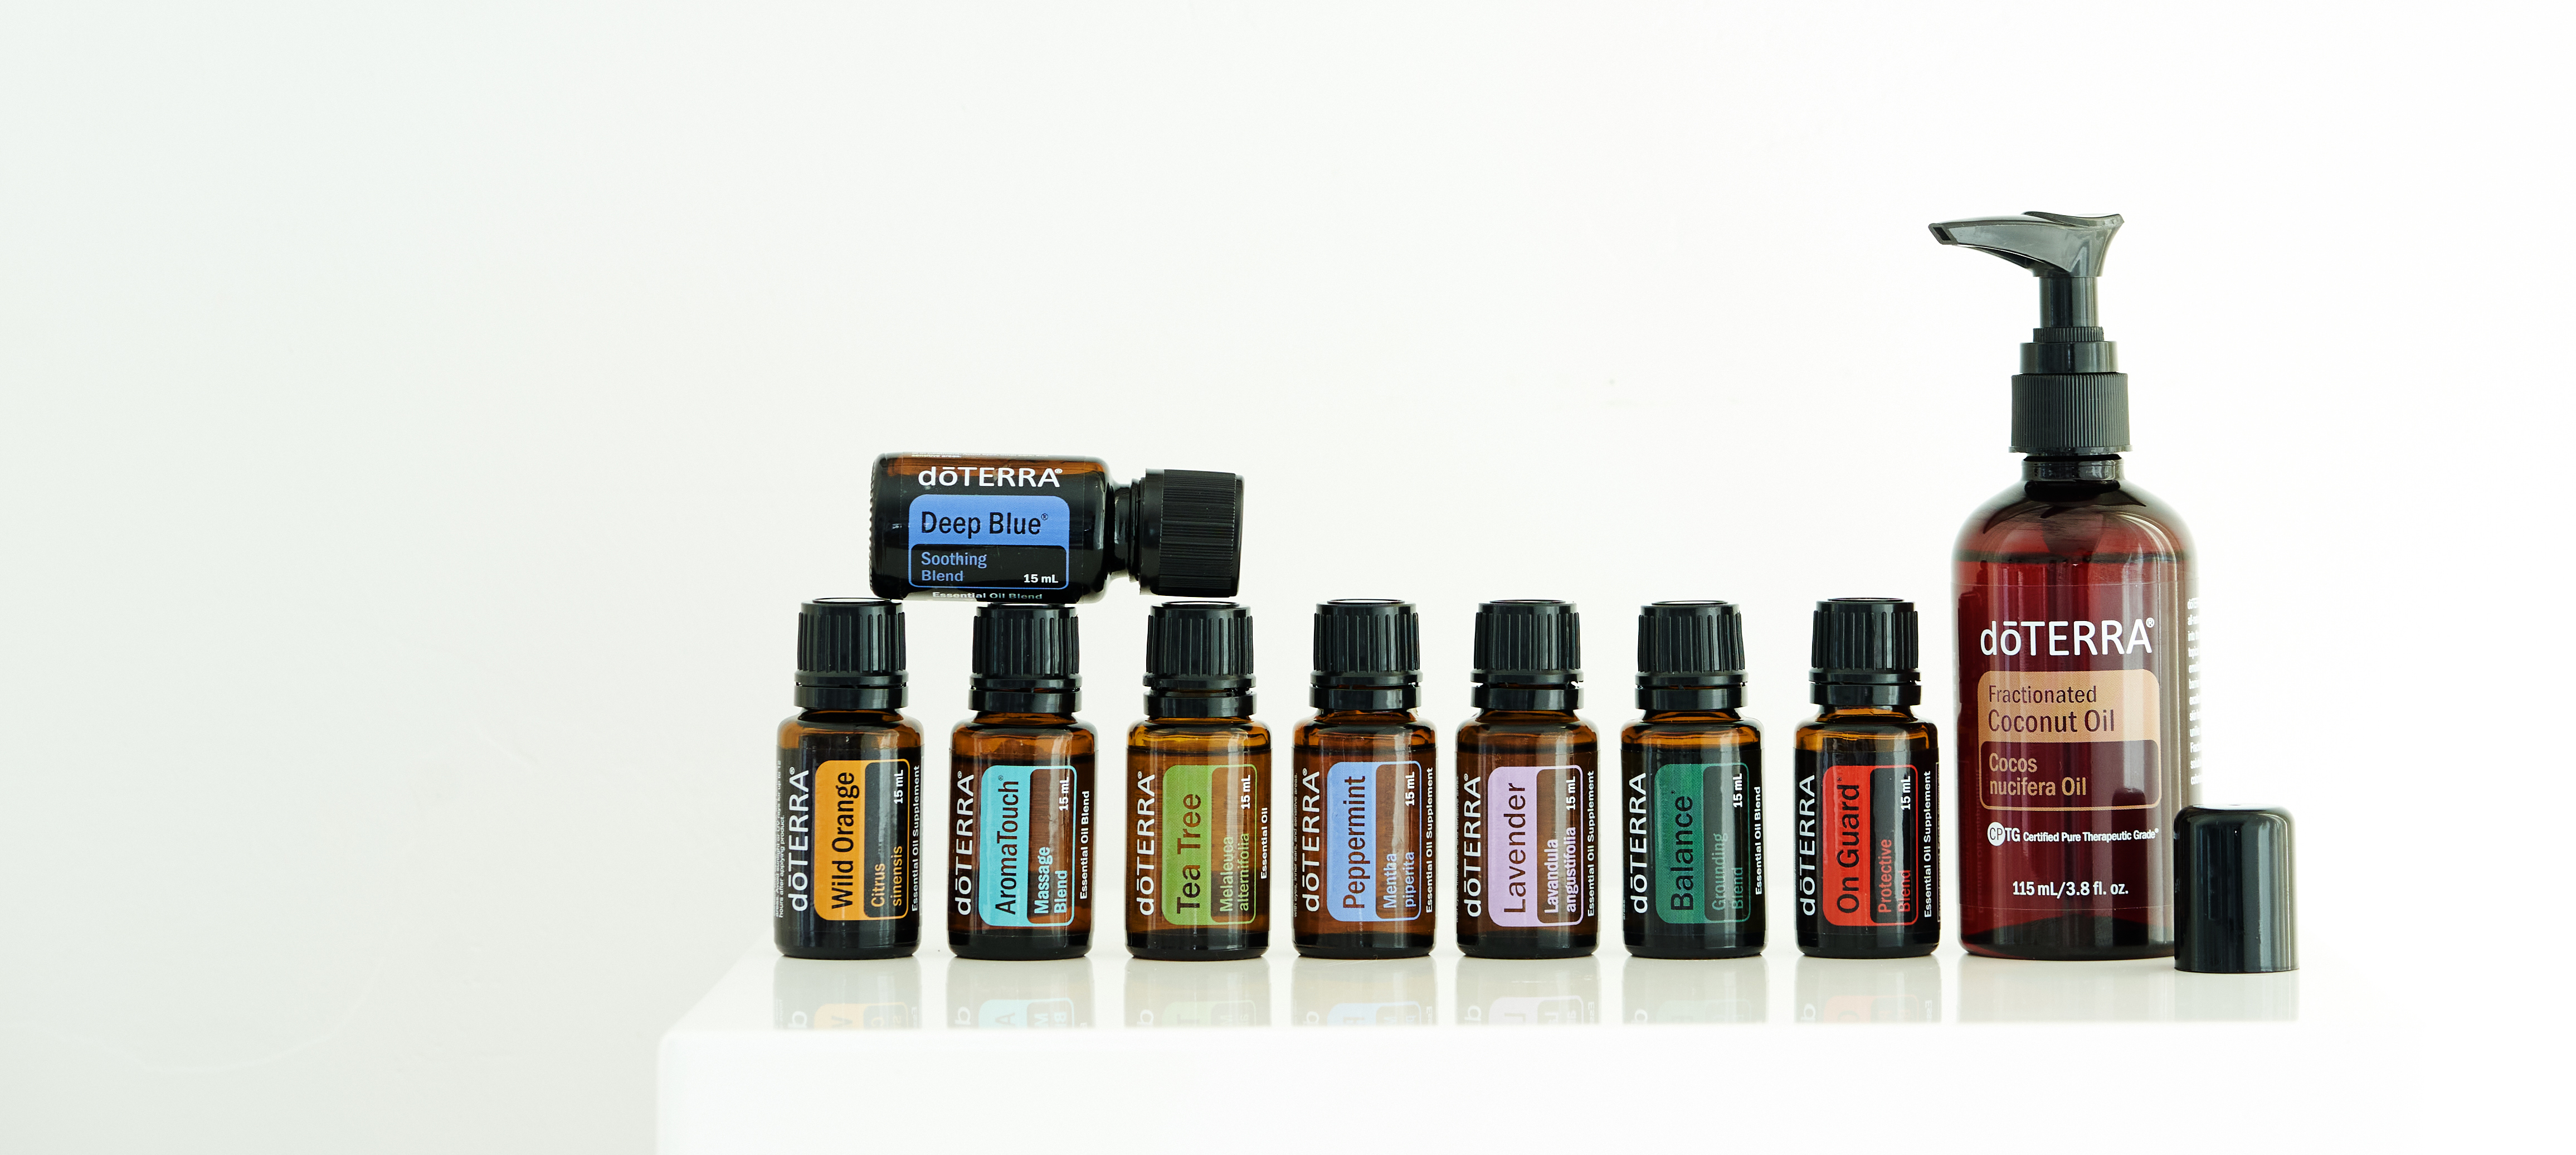 AromaTouch Technique doTERRA On Guard Protective Blend